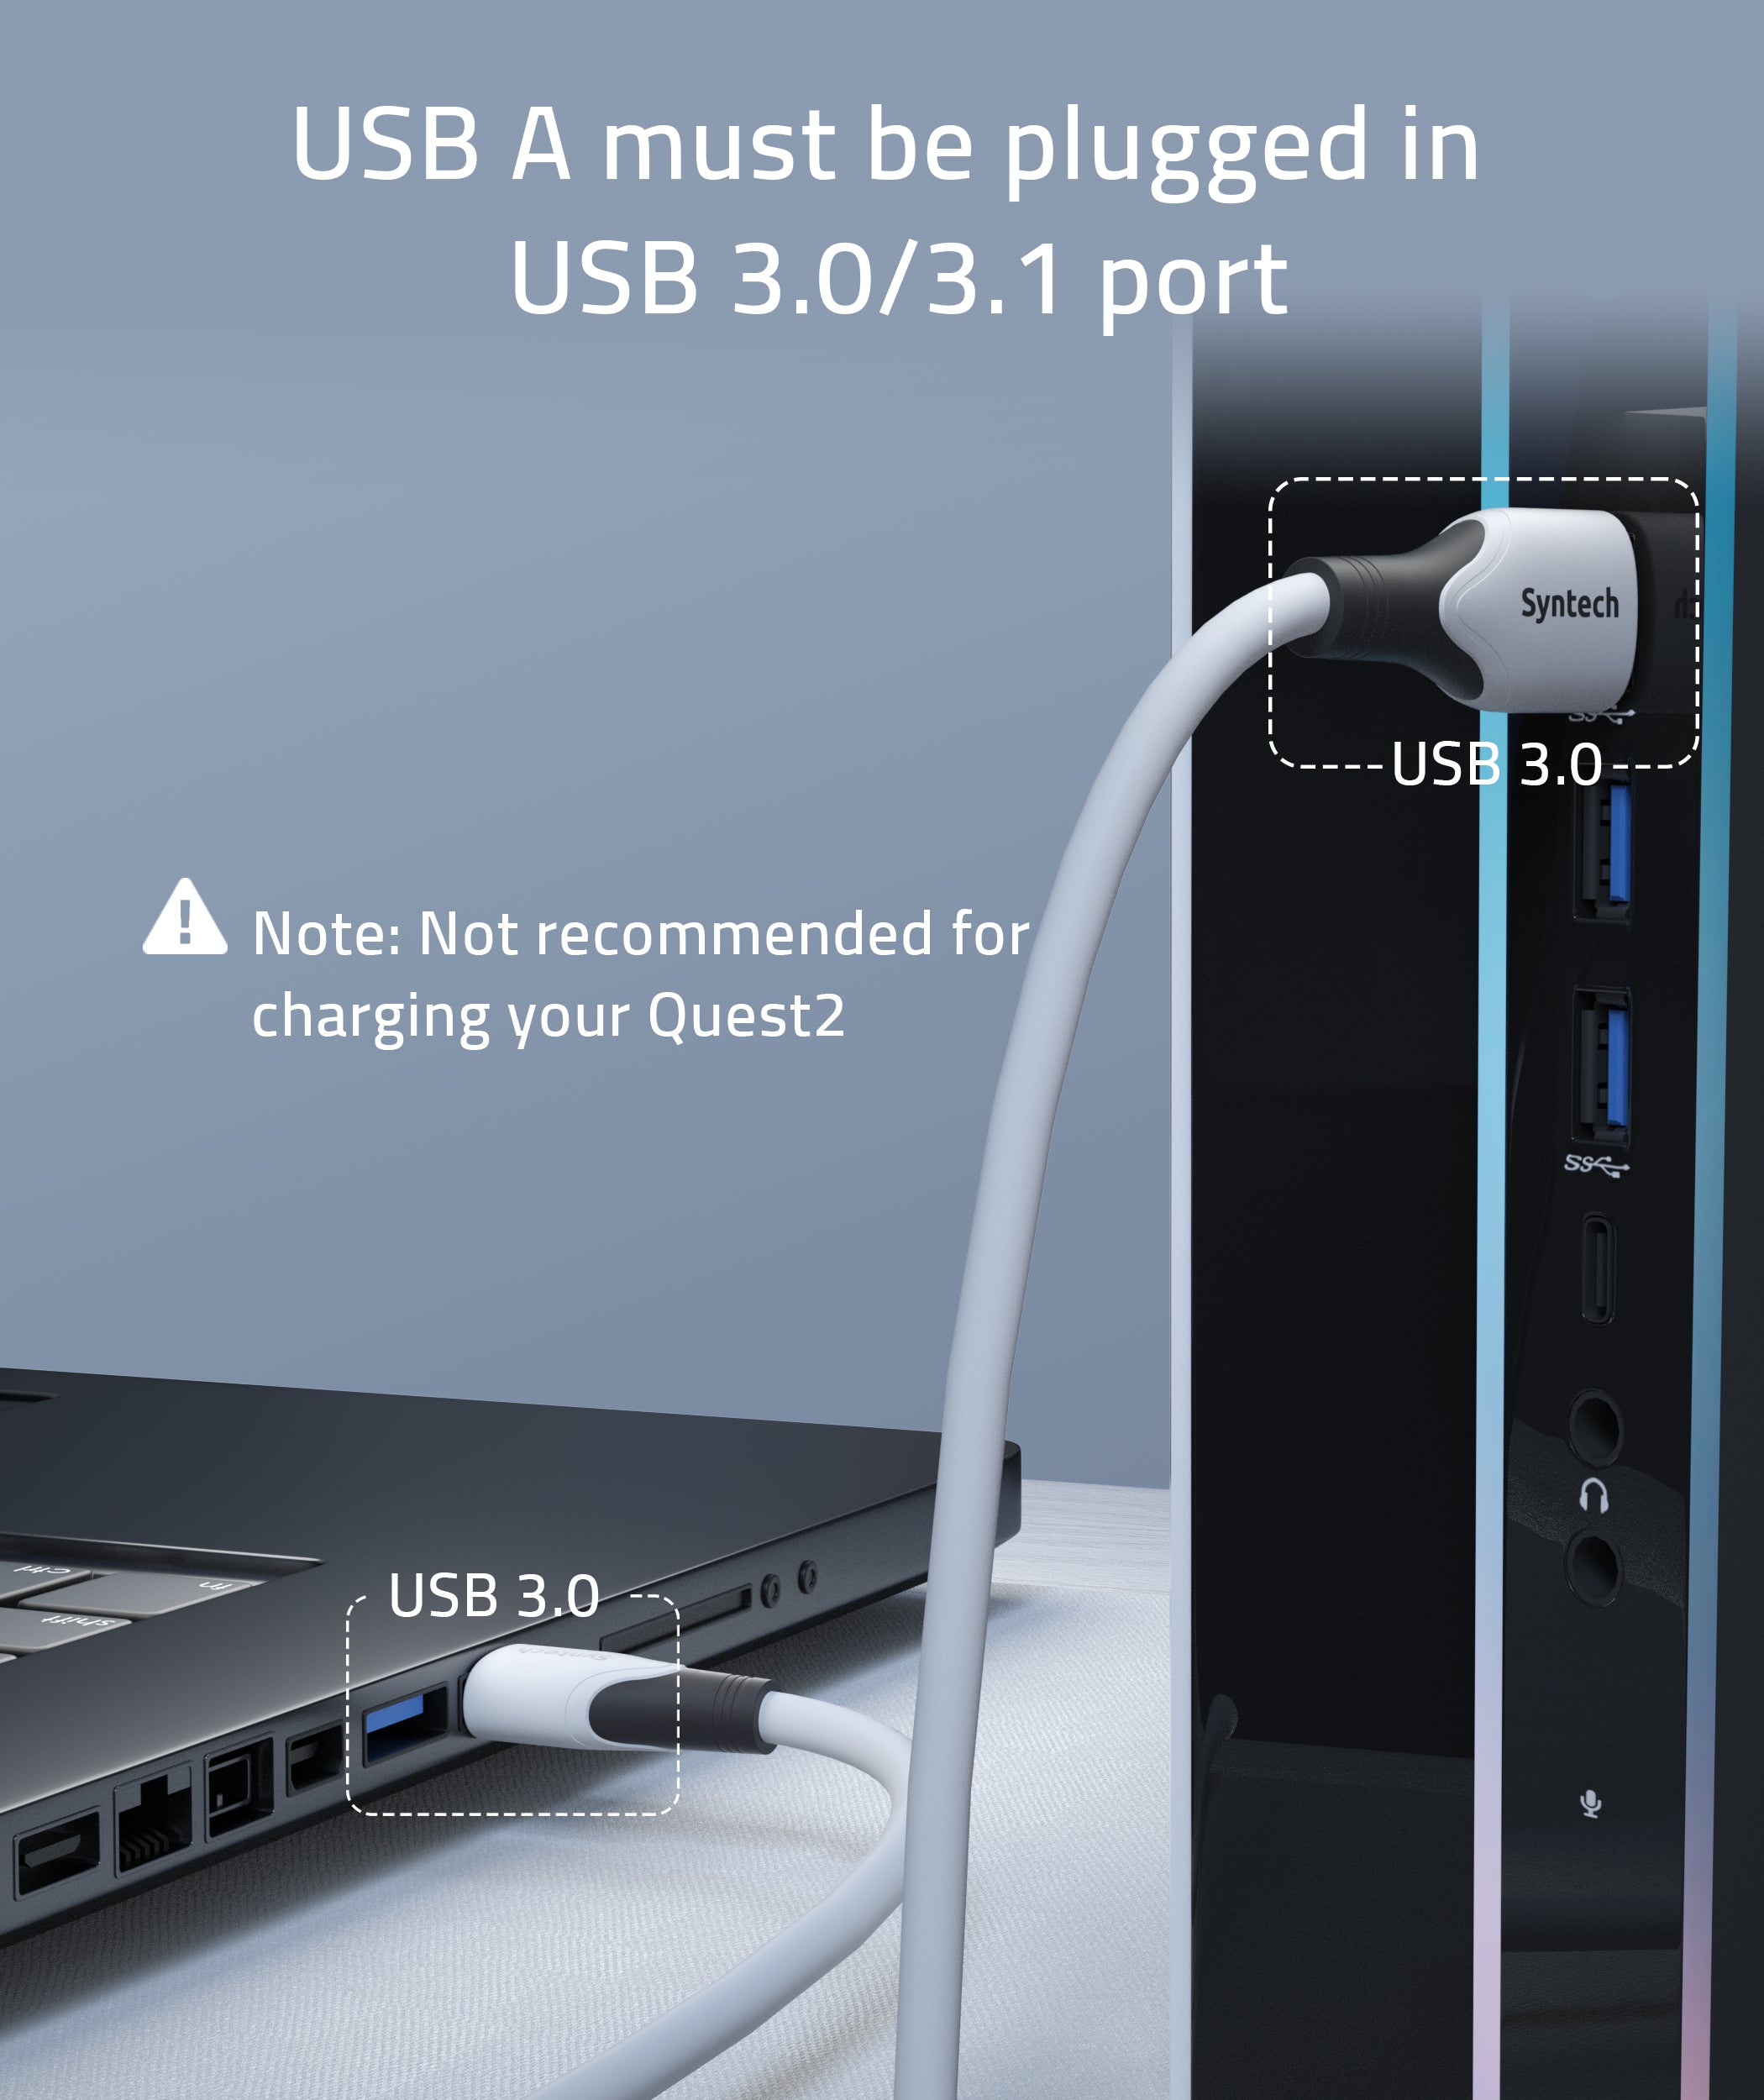 usb a must be plugged in usb 3.0/3.1port